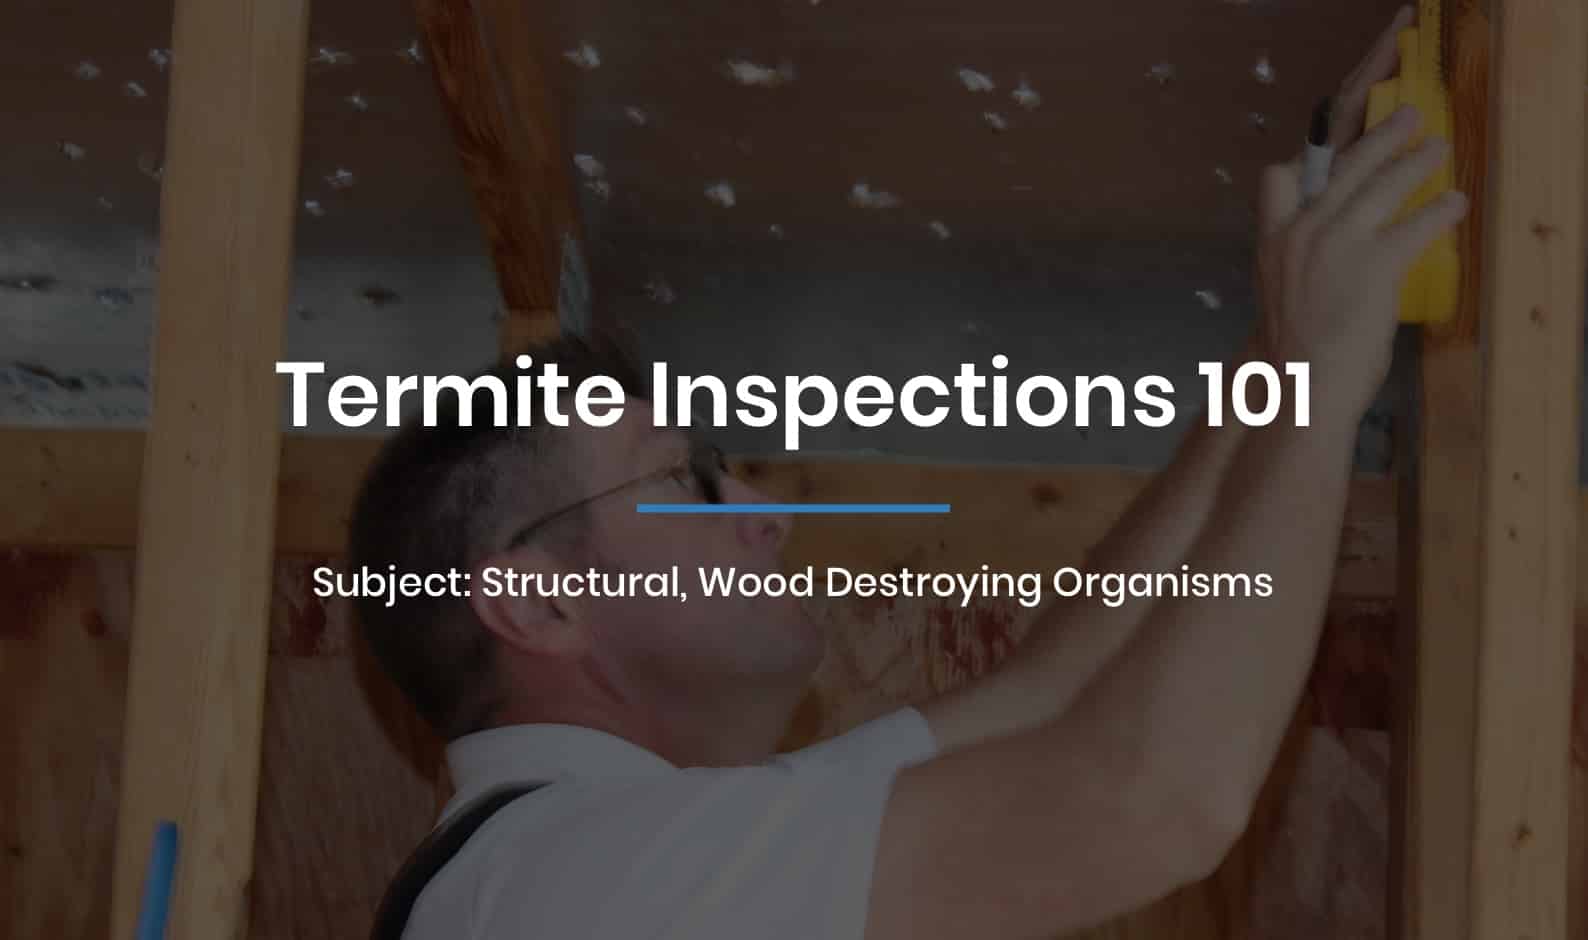 Termite inspections 101